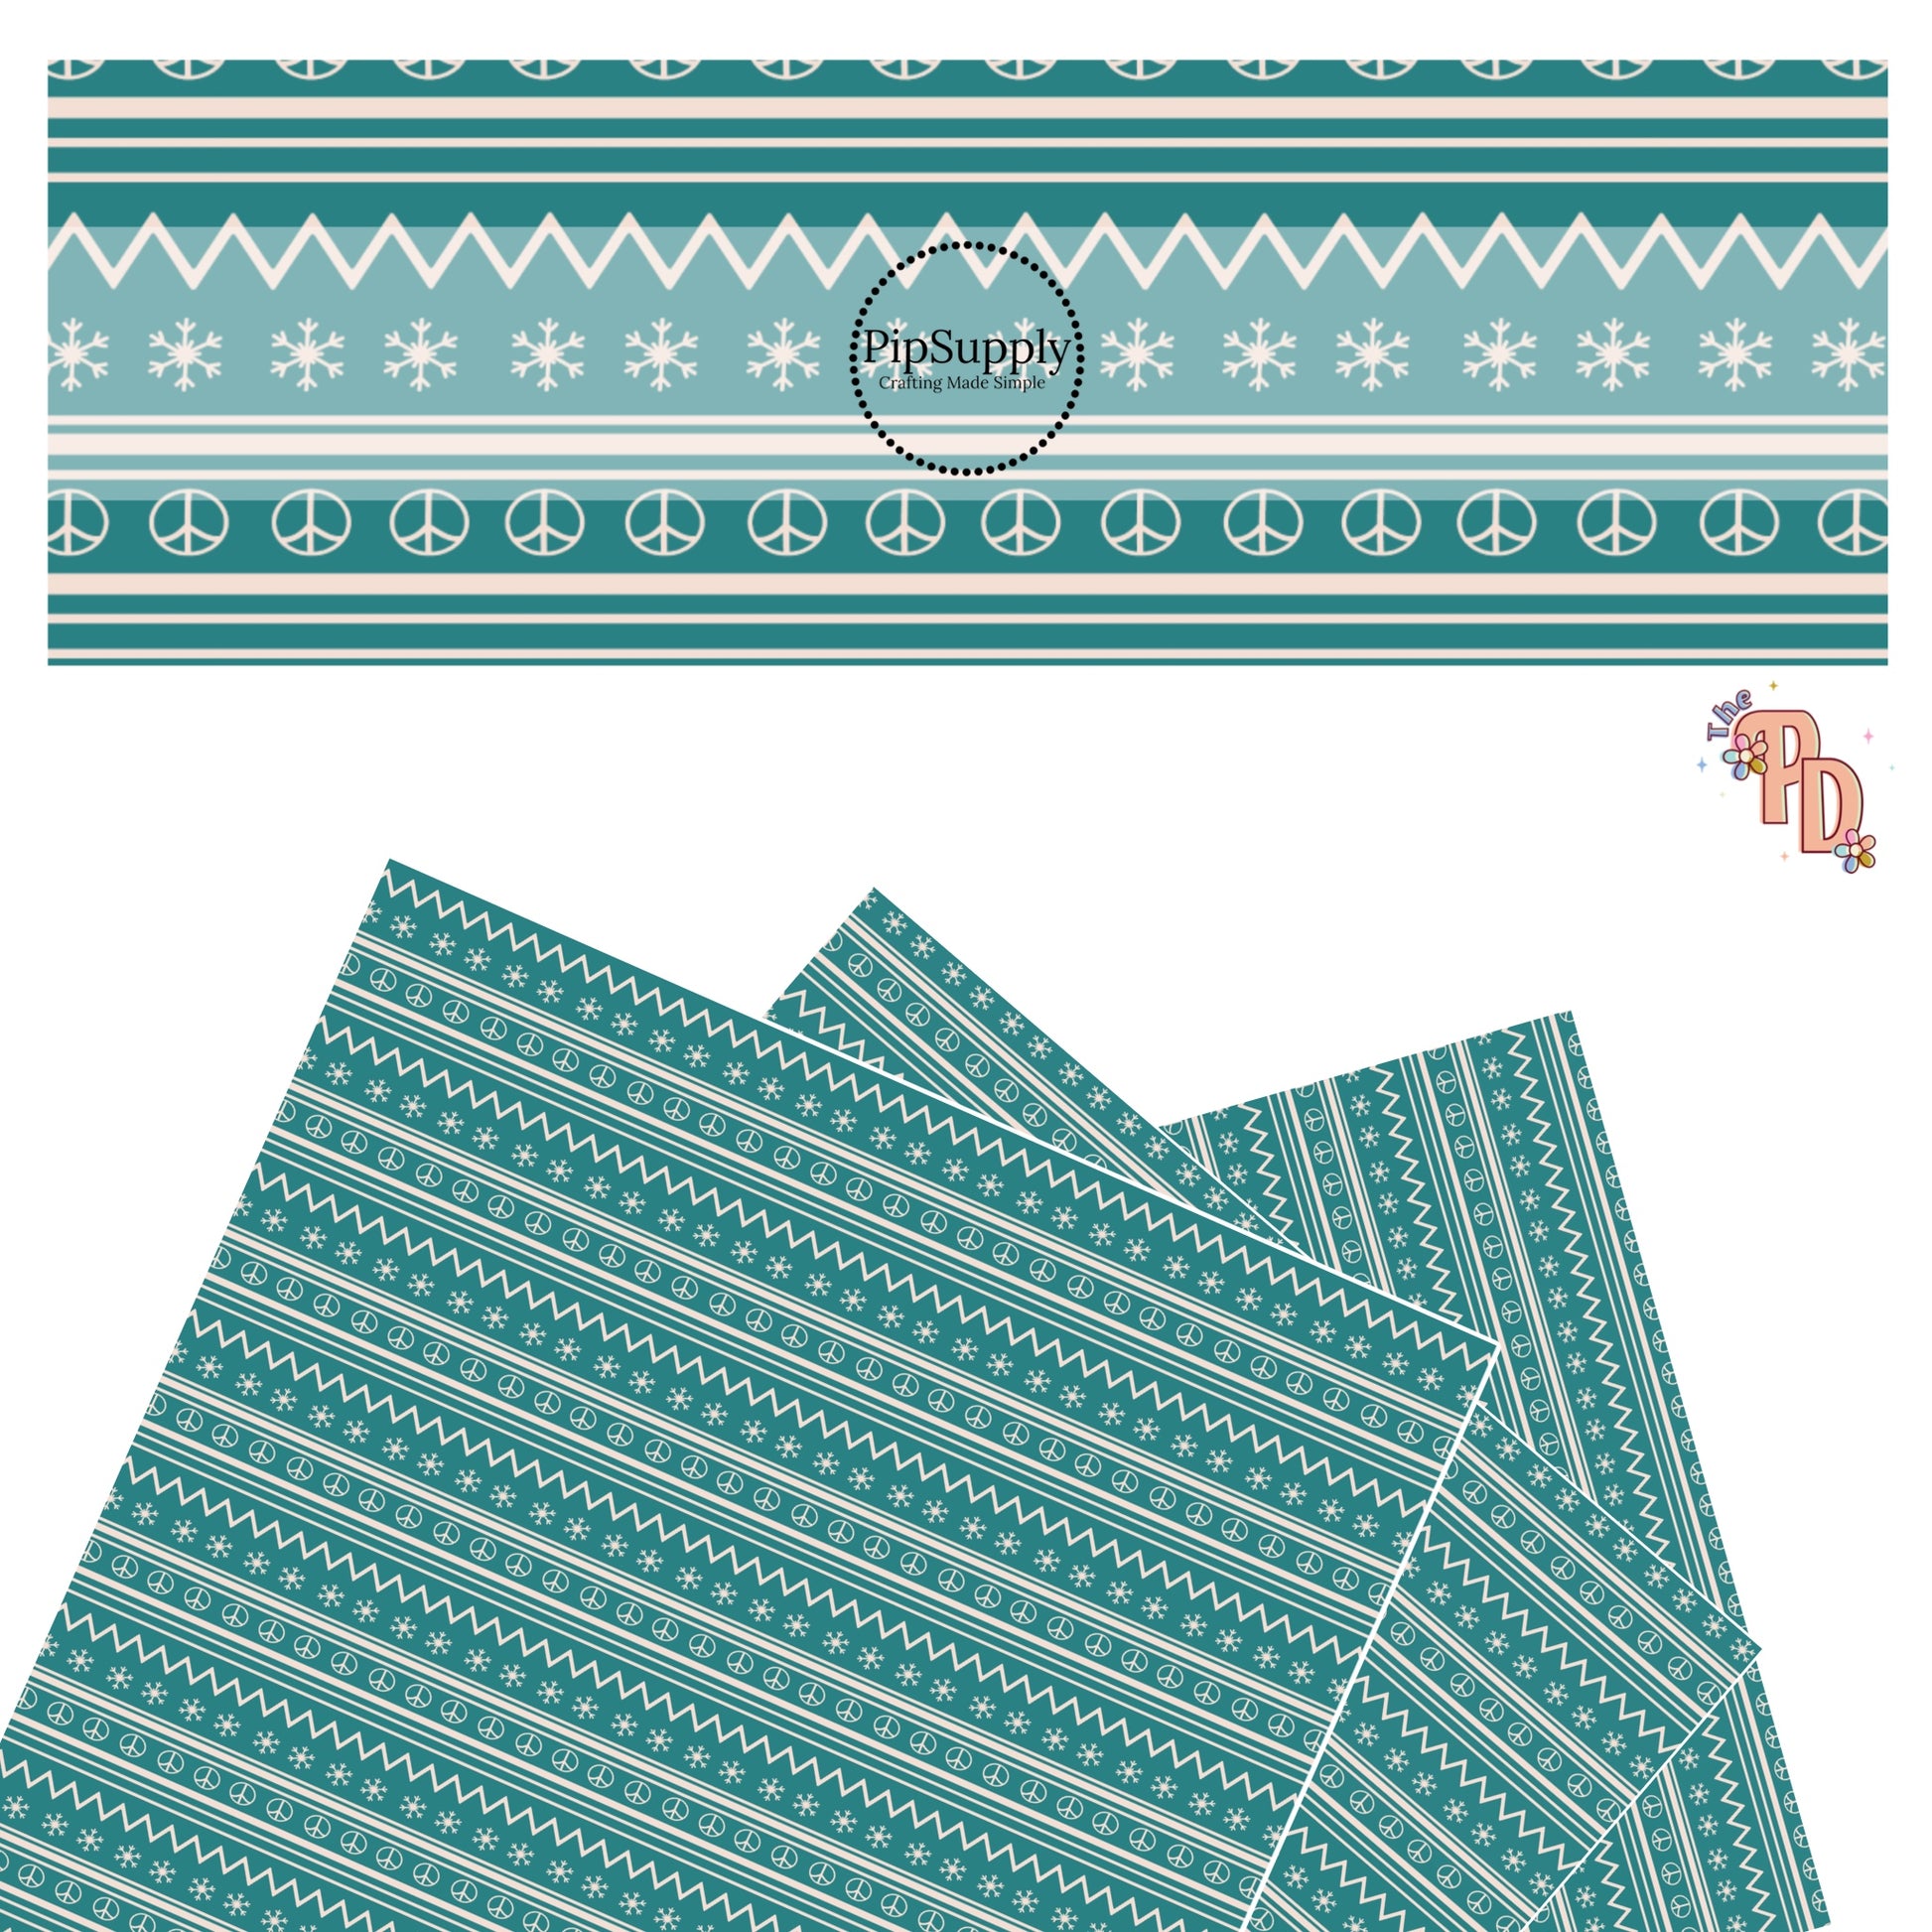 Snowflakes, peace signs, and white lines on turquoise faux leather sheet